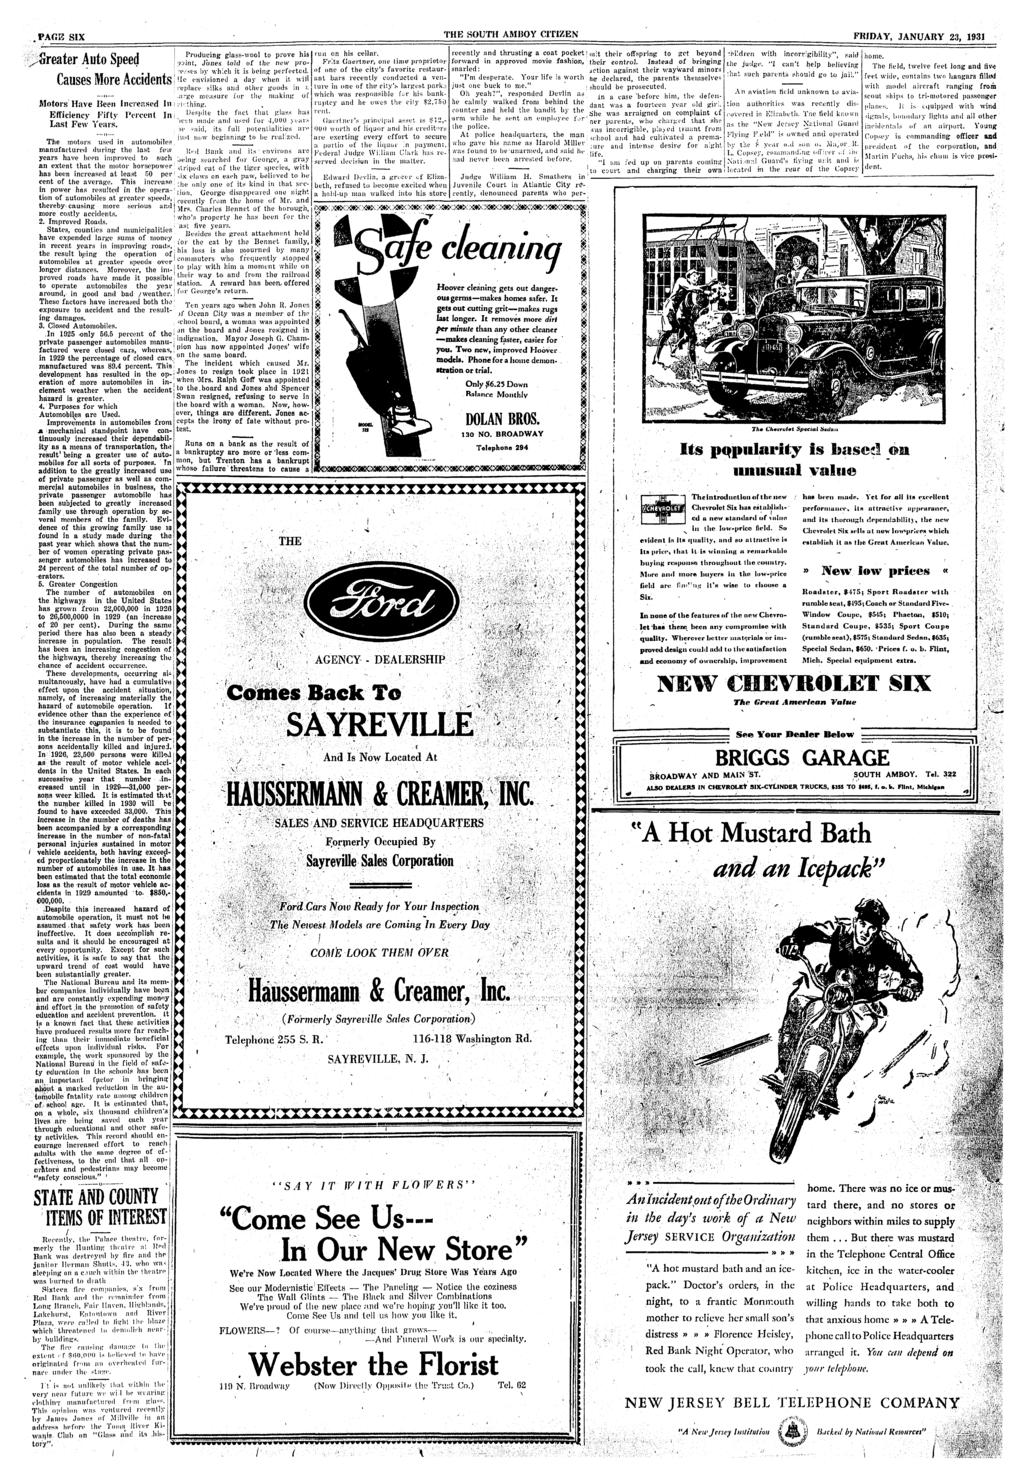 PACE SIX THE SOUTH AMBOY CITIZEN FMDAY, JANUARY 23, 1931 greater Auto Speed Causes More Accdents! 2. Improved Roads.